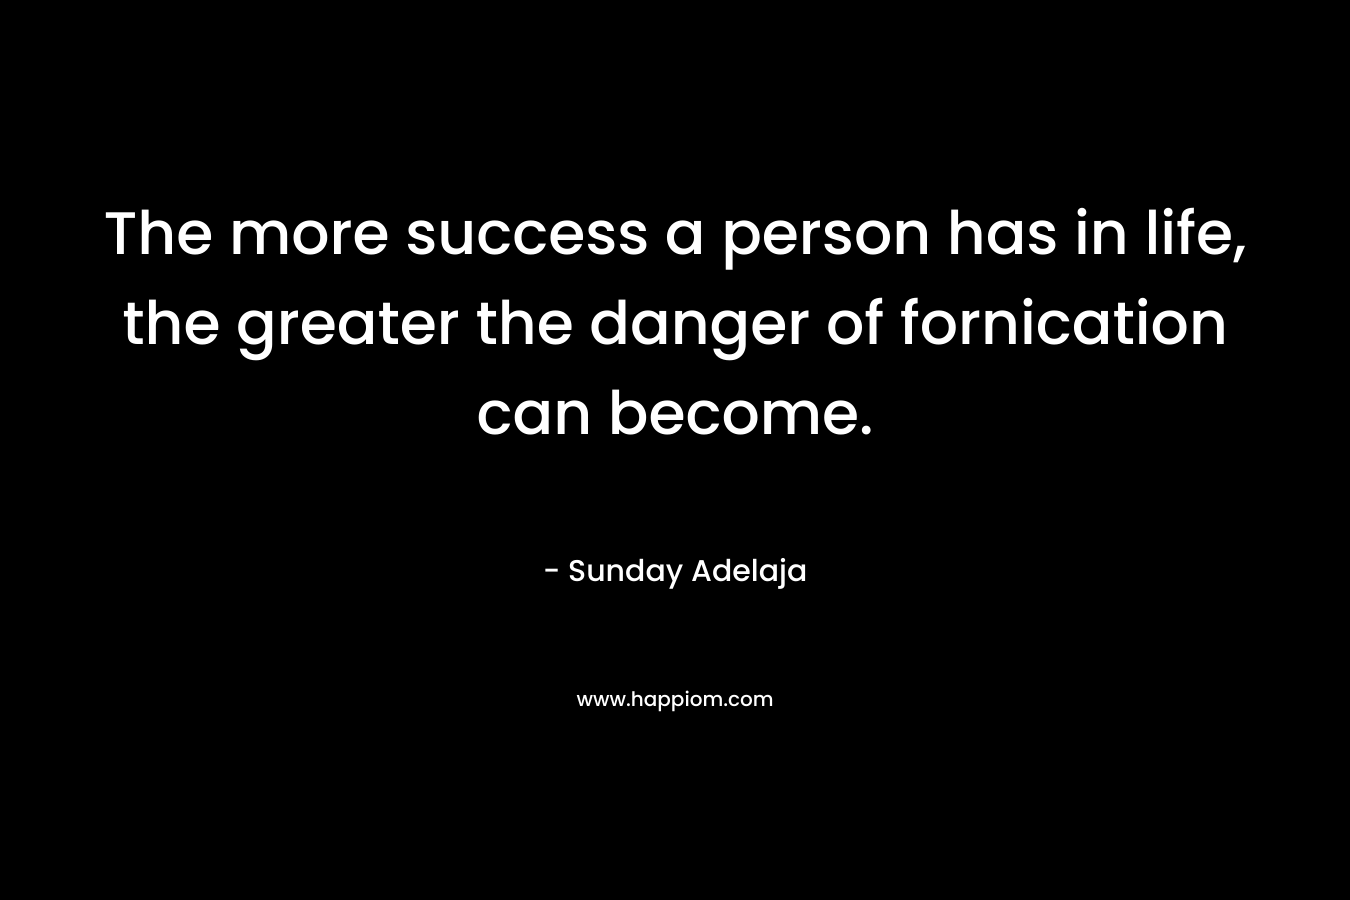 The more success a person has in life, the greater the danger of fornication can become. – Sunday Adelaja